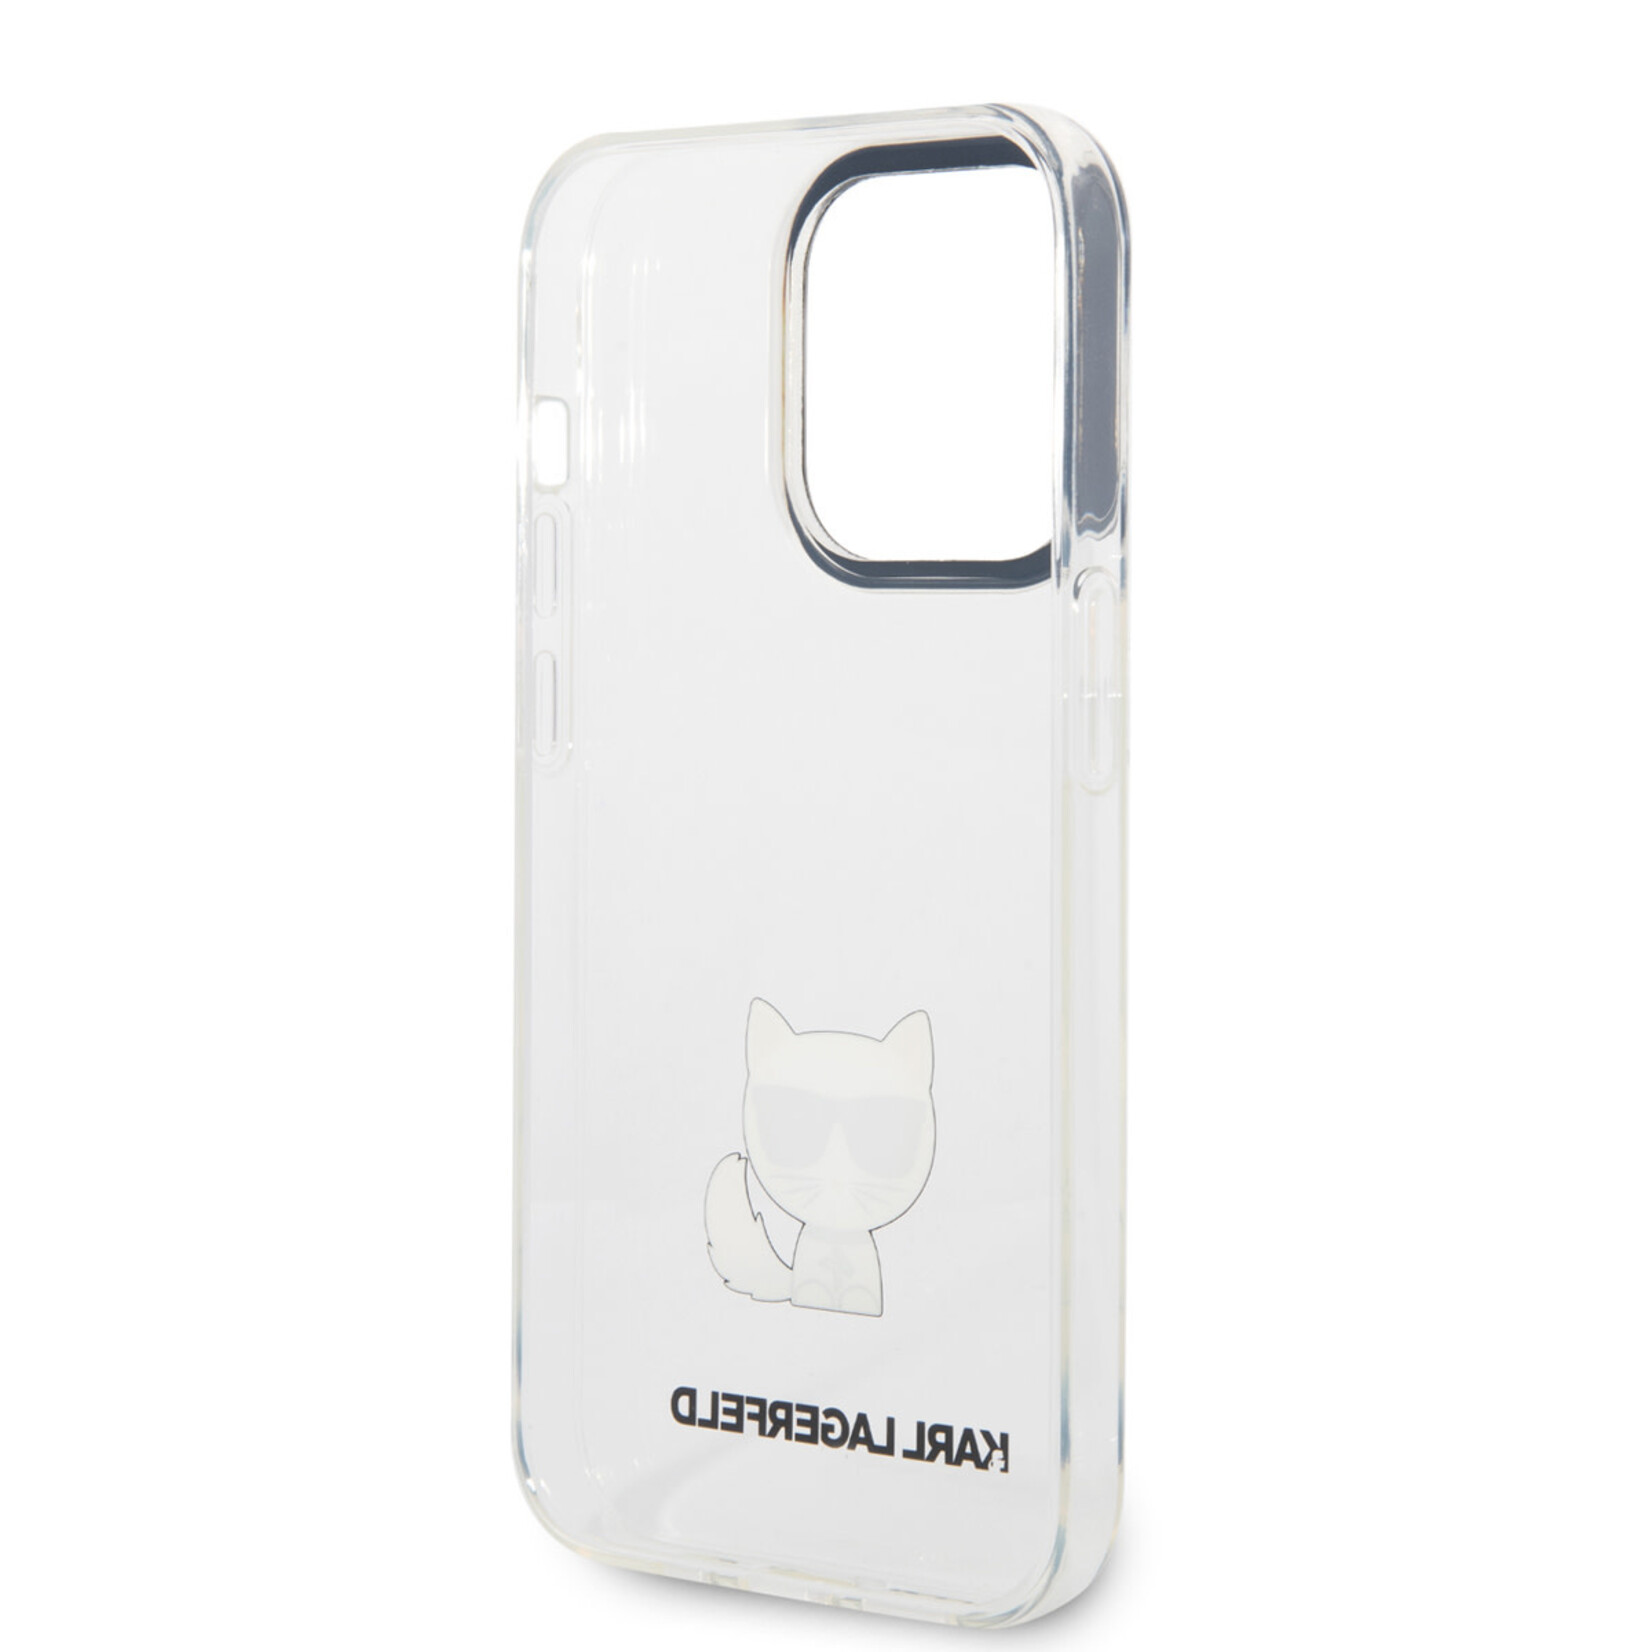 Karl Lagerfeld Karl Lagerfeld iPhone 14 Pro TPU Backcover - Choupette - Transparant